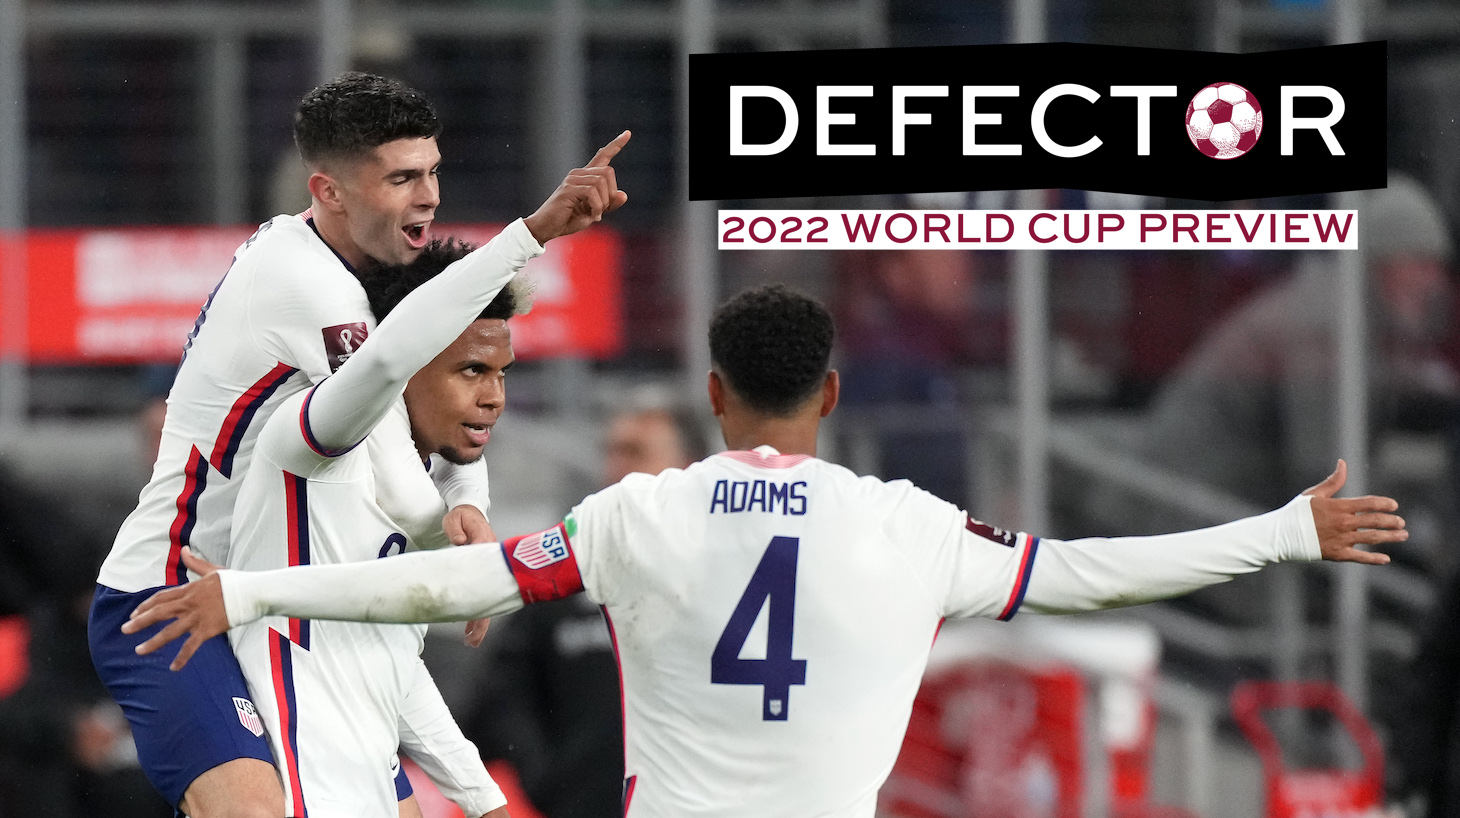 United States midfielder Weston McKennie (8) celebrates with forward Christian Pulisic (10), midfielder Tyler Adams (4) and teammates after scoring a goal during a CONCACAF World Cup Qualifying game between the United States and Mexico on November 12, 2021 at TQL Stadium in Cincinnati, OH.